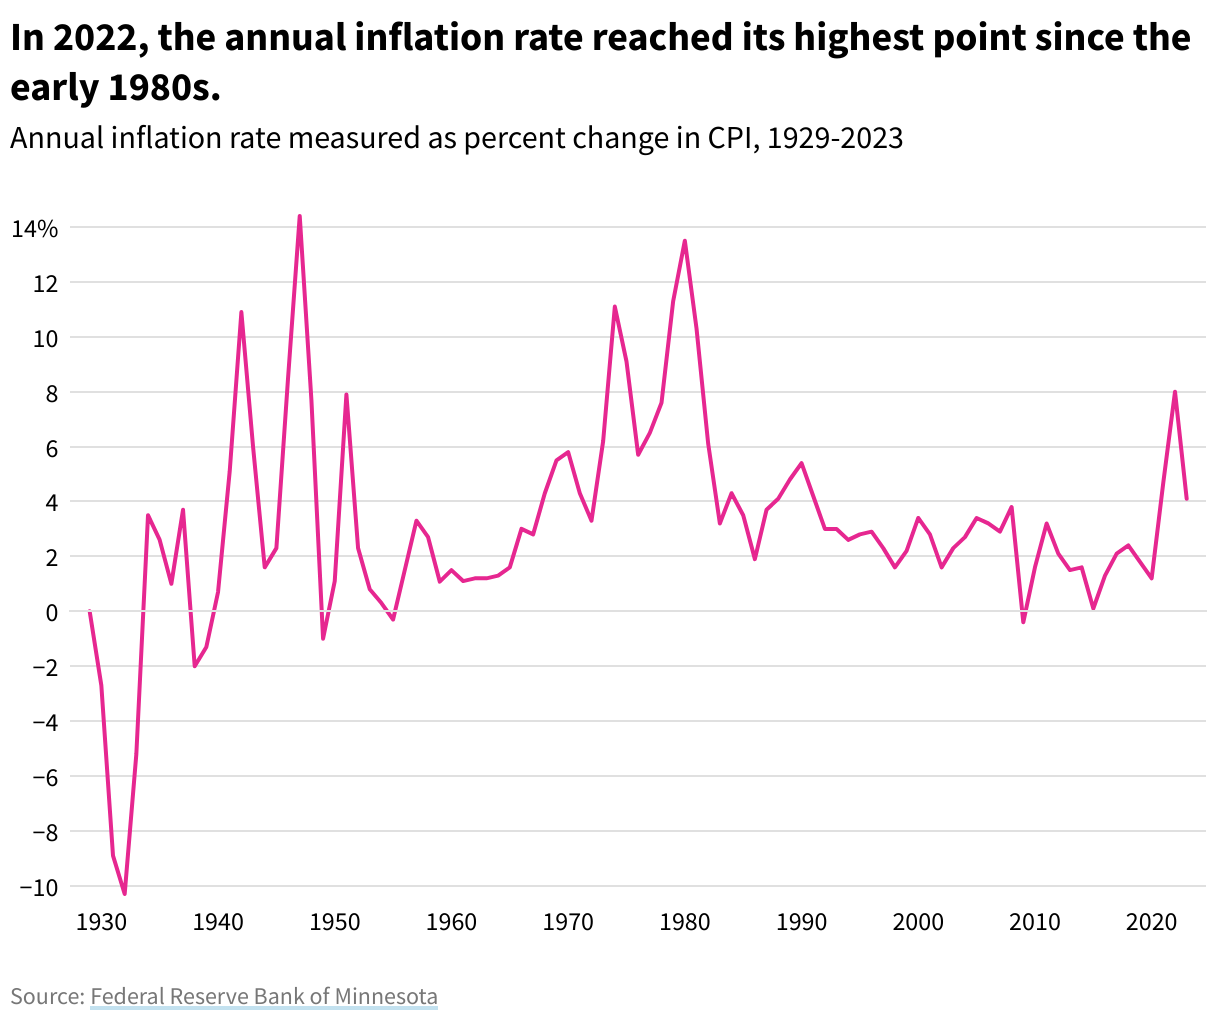 Line graph showing annual inflation rate measured as percent change in CPI, 1929-2023